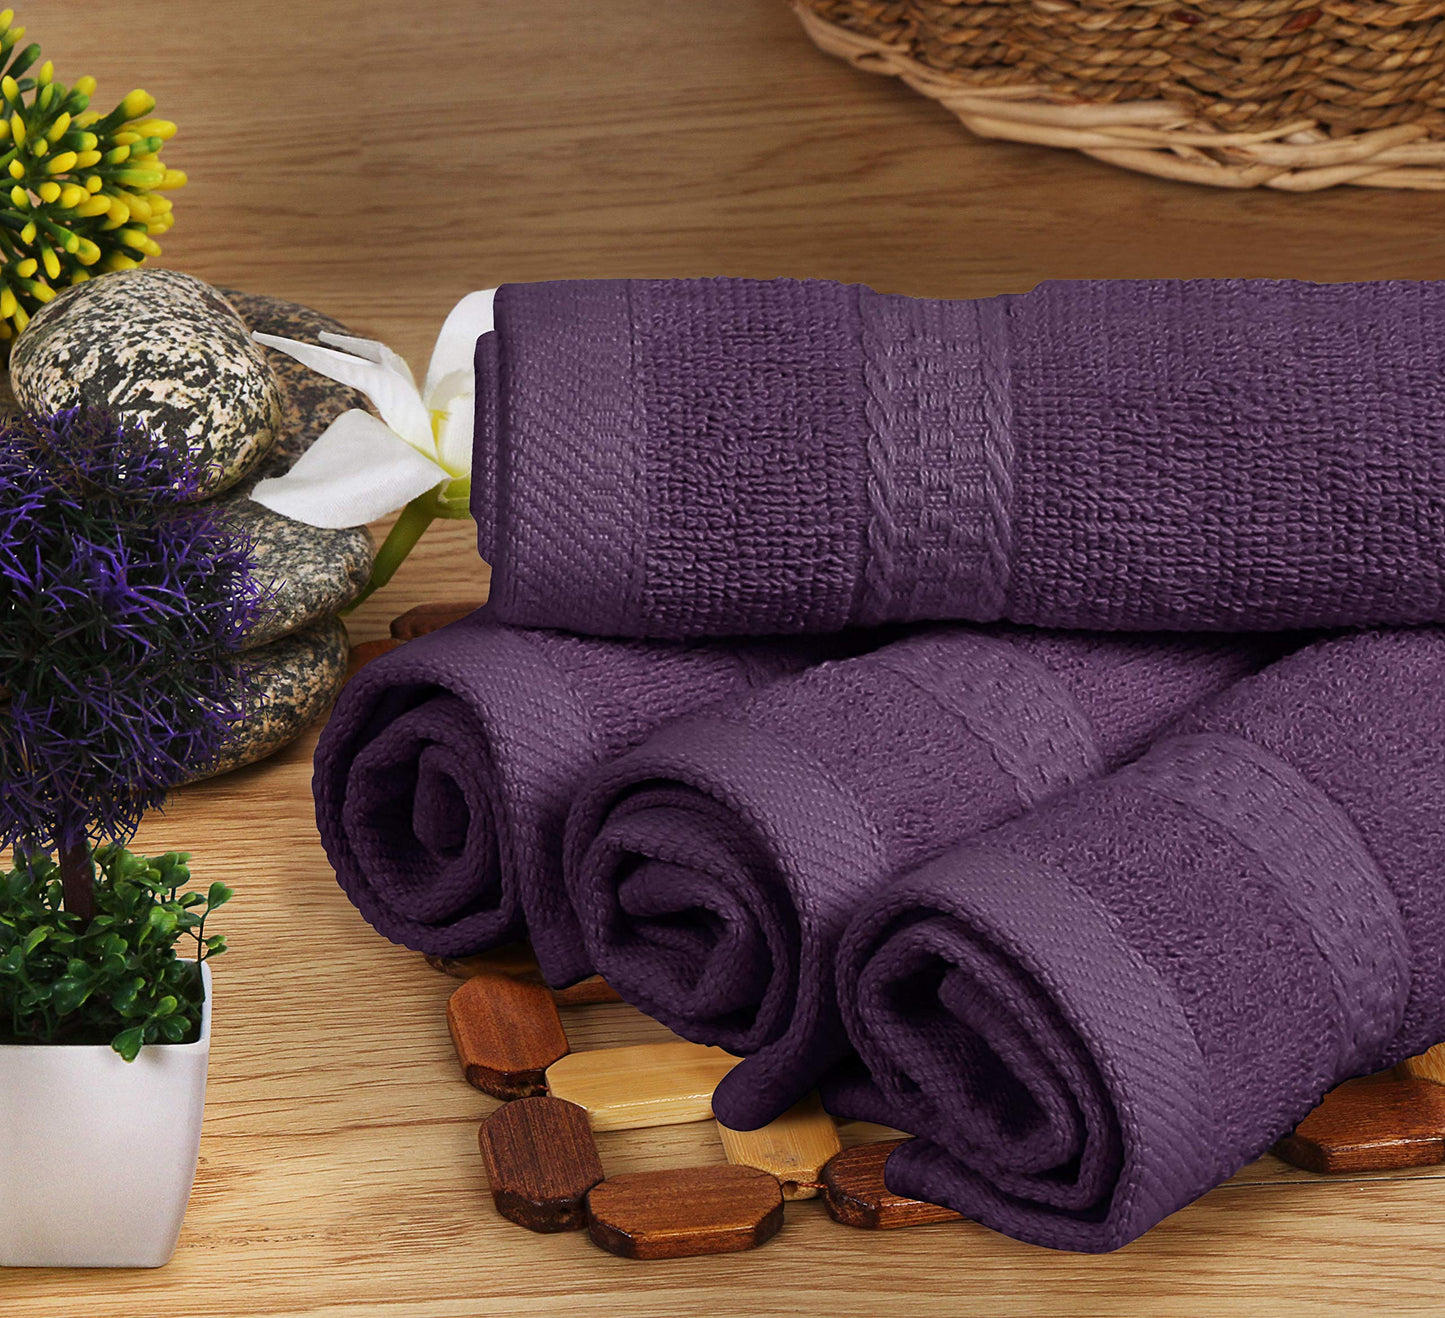 Utopia Towels 8-Piece Premium Towel Set, 2 Bath Towels, 2 Hand Towels, and 4 Wash Cloths, 600 GSM 100% Ring Spun Cotton Highly Absorbent Towels for Bathroom, Gym, Hotel, and Spa (Plum)